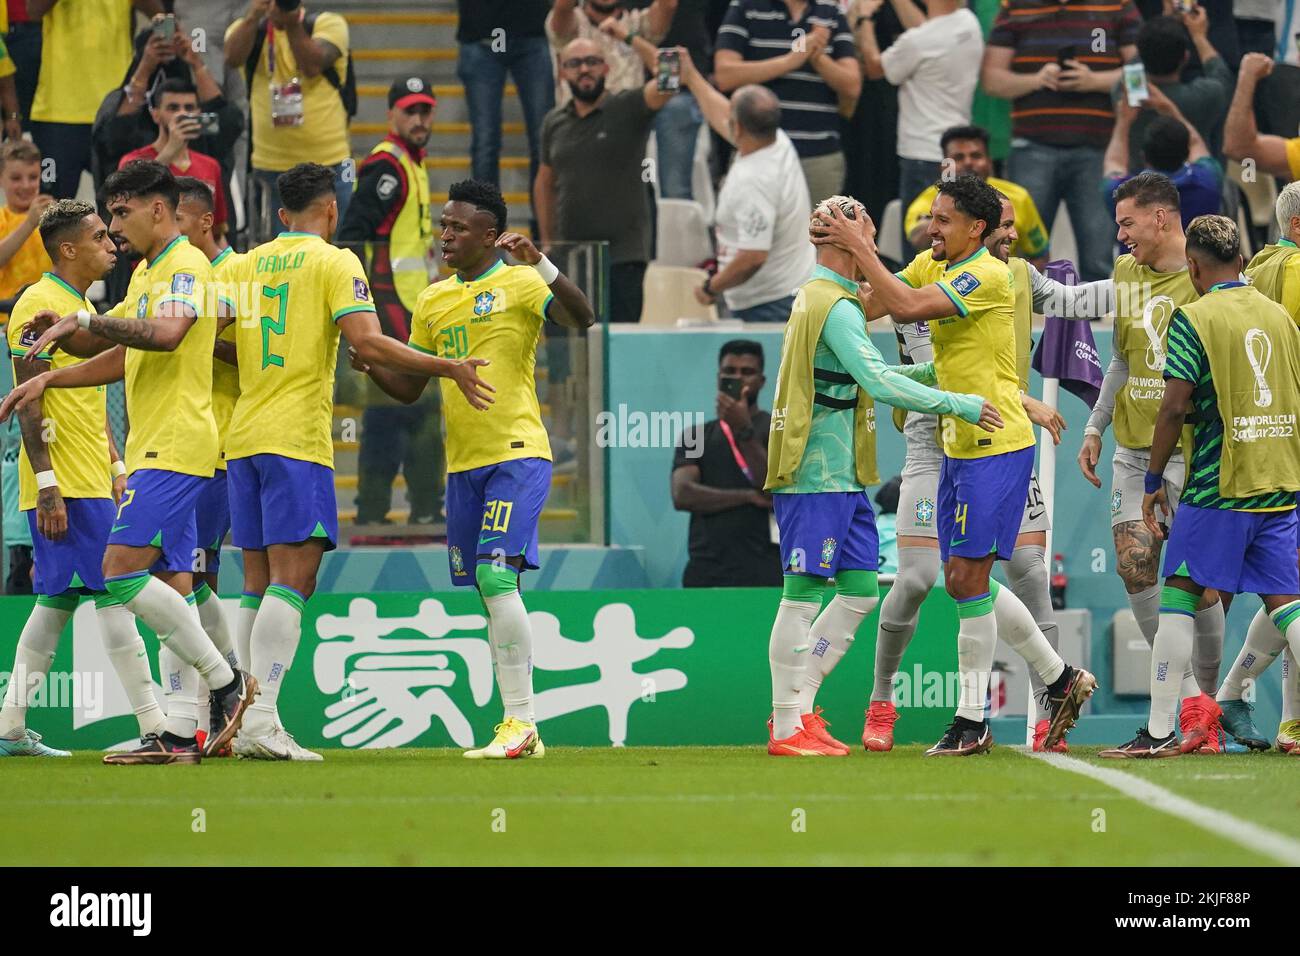 LUSAIL, QATAR - NOVEMBER 24: Players of Brazil celebrate after Richarlison scoring a goal during the FIFA World Cup Qatar 2022 group G match between Brazil and Serbia at Lusail Stadium on November 24, 2022 in Lusail, Qatar. (Photo by Florencia Tan Jun/PxImages) Credit: Px Images/Alamy Live News Stock Photo